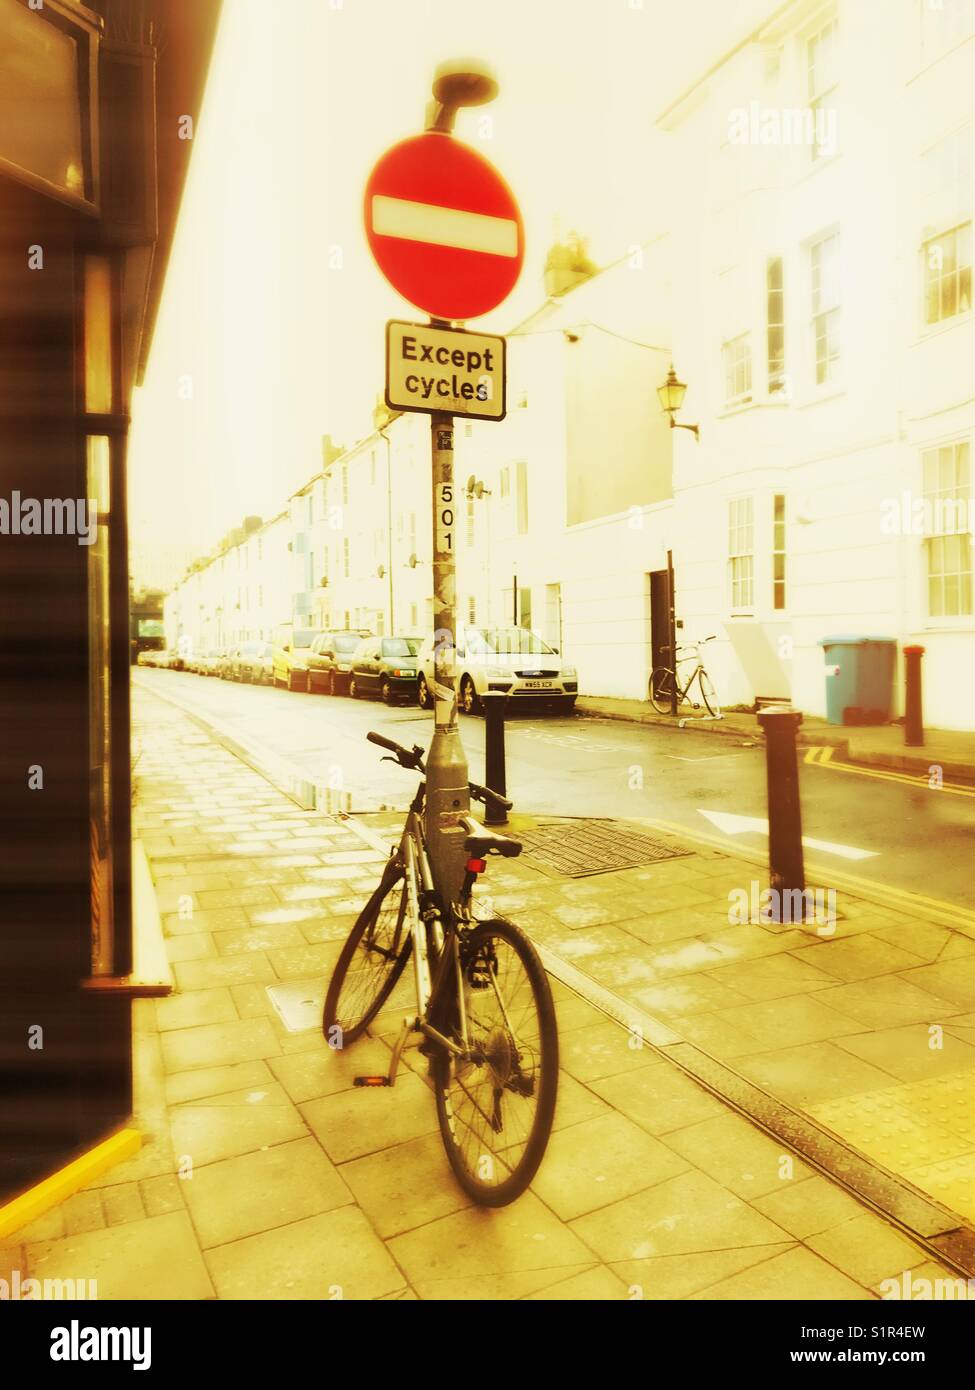 Bicycle parked against No Entry sign with contradictory notice, ‘except cycles’. Stock Photo